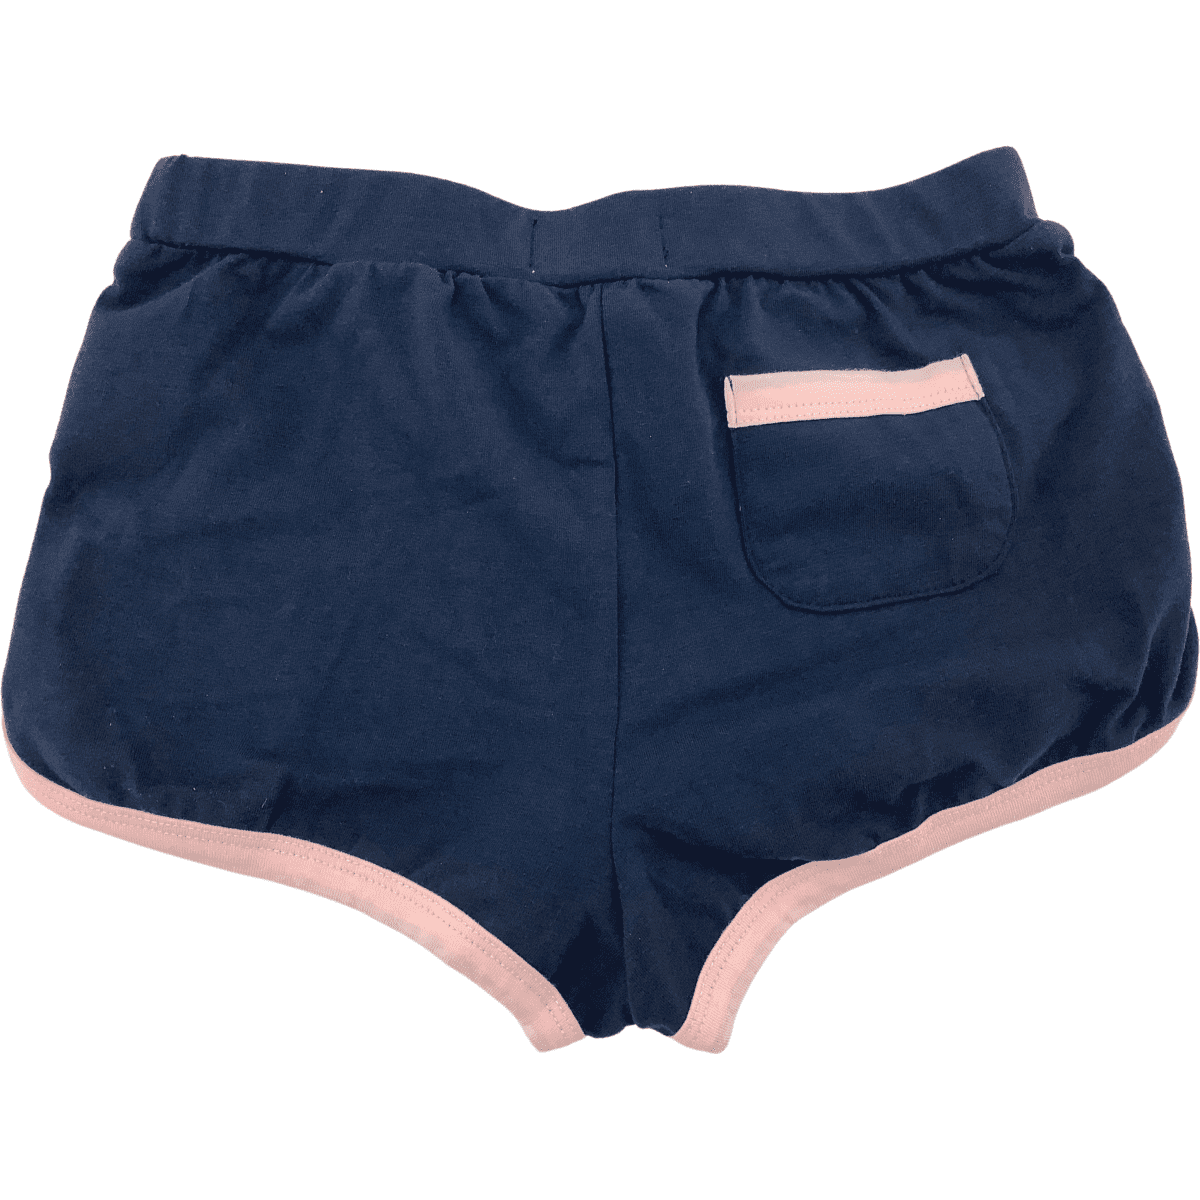 Epic Threads girl's shorts 02